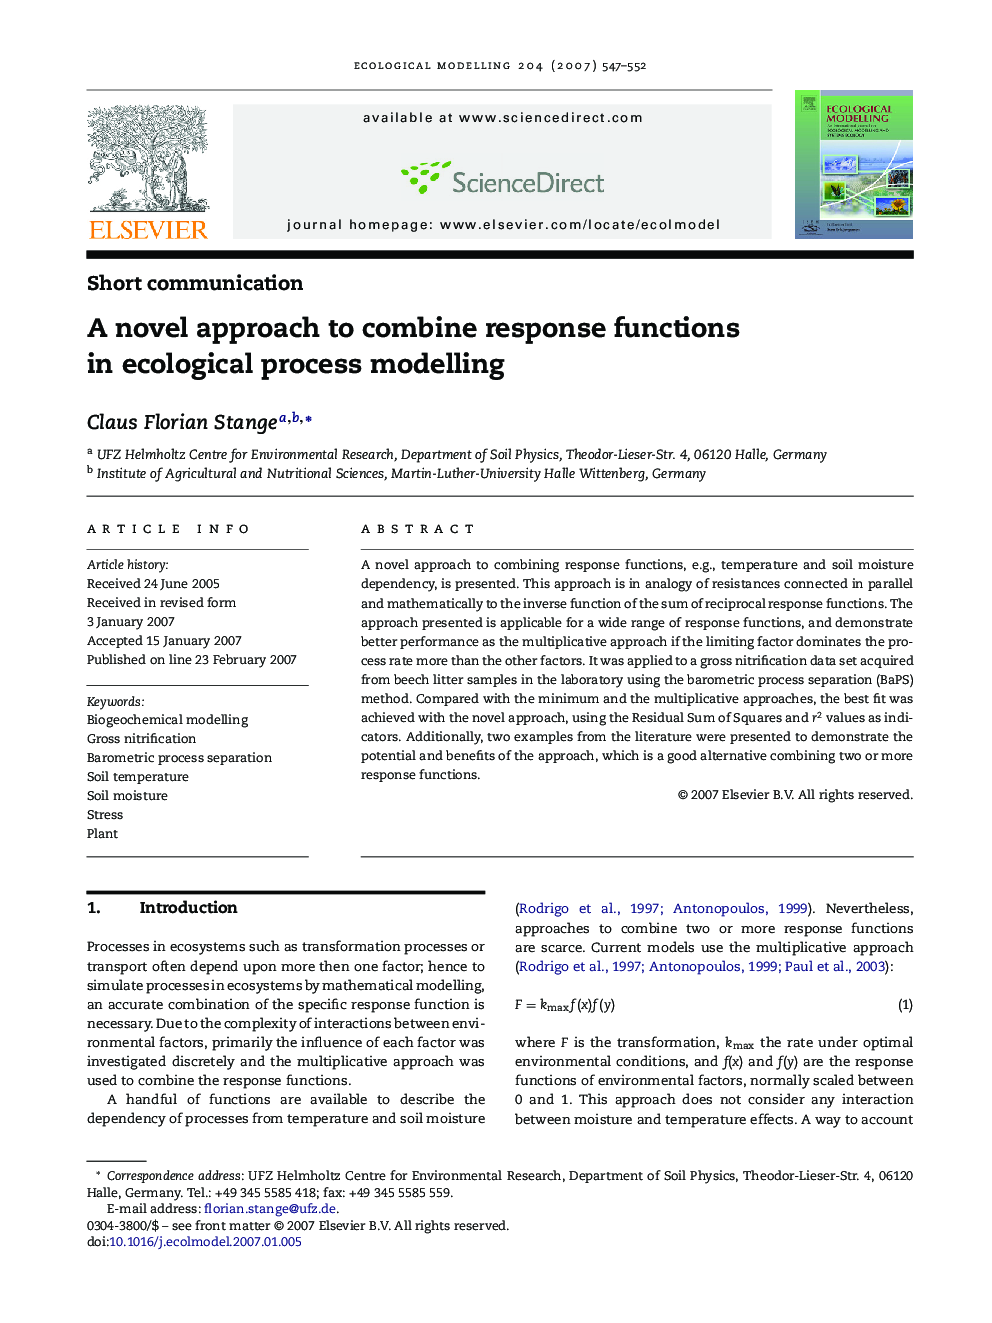 A novel approach to combine response functions in ecological process modelling